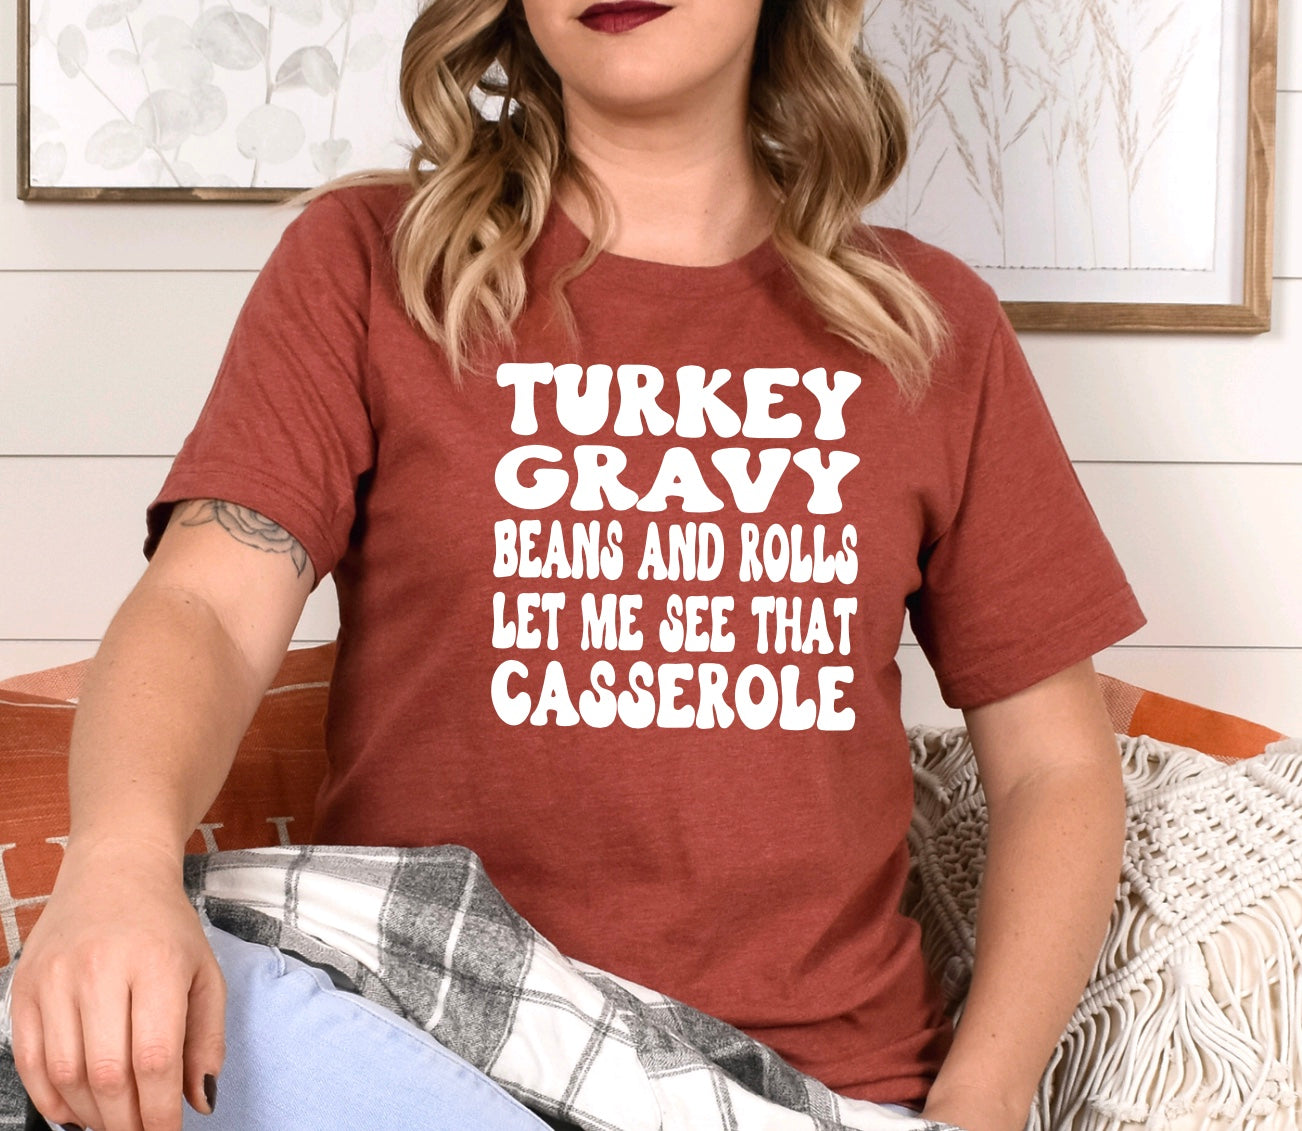 Turkey gravy beans and rolls let me see that casserole | funny thanksgiving t-shirt in heather clay